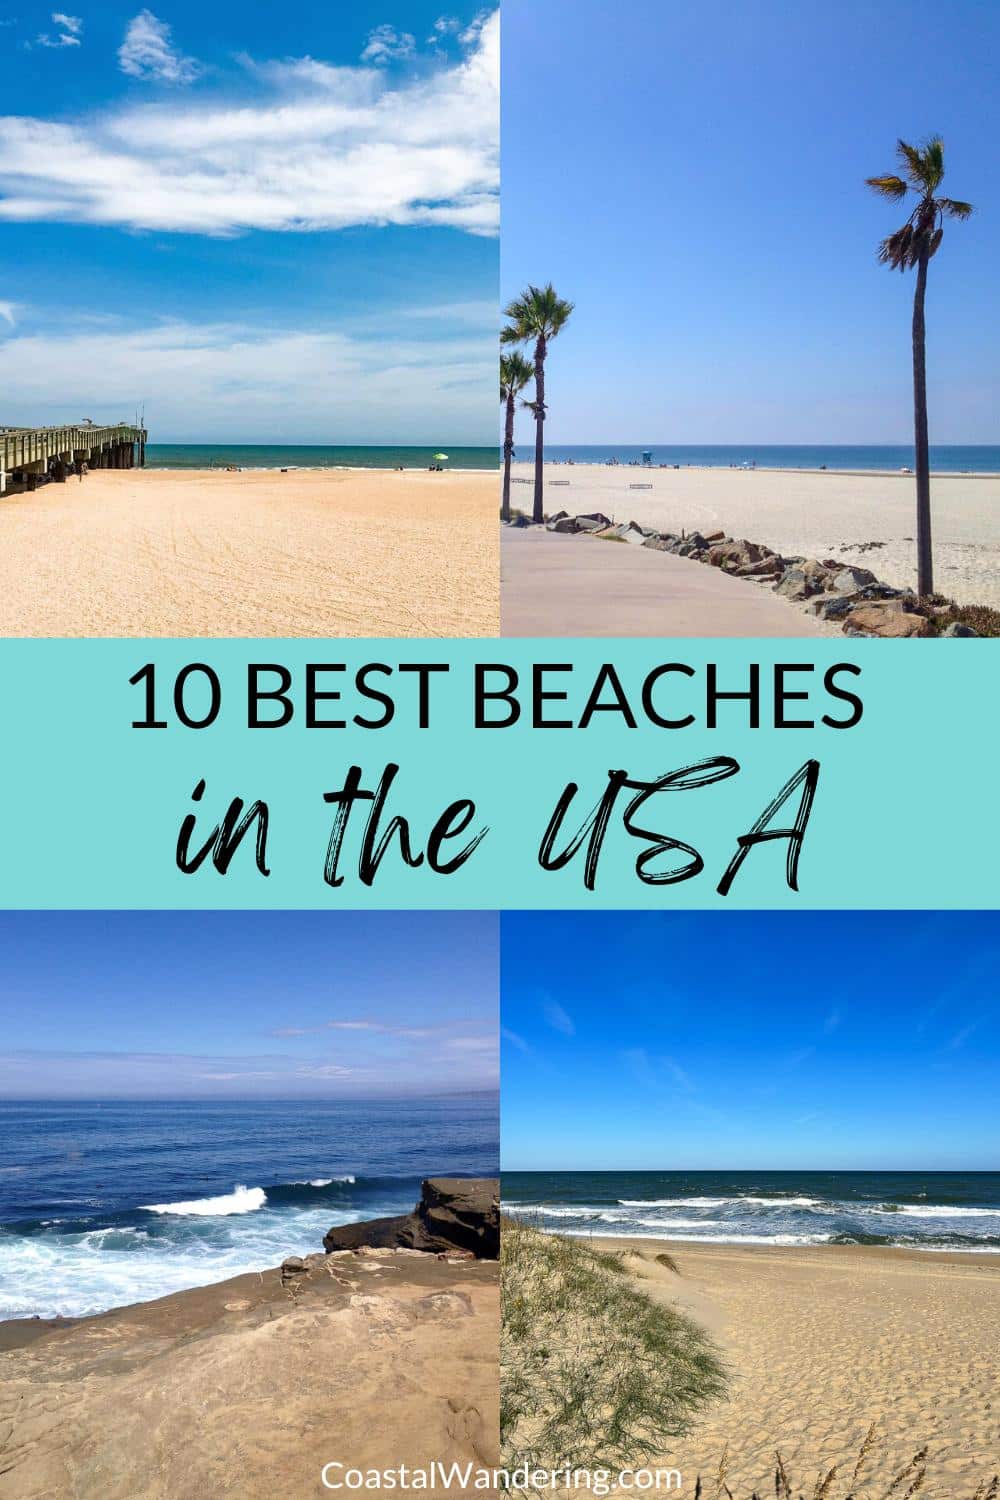 10 best beaches in the USA